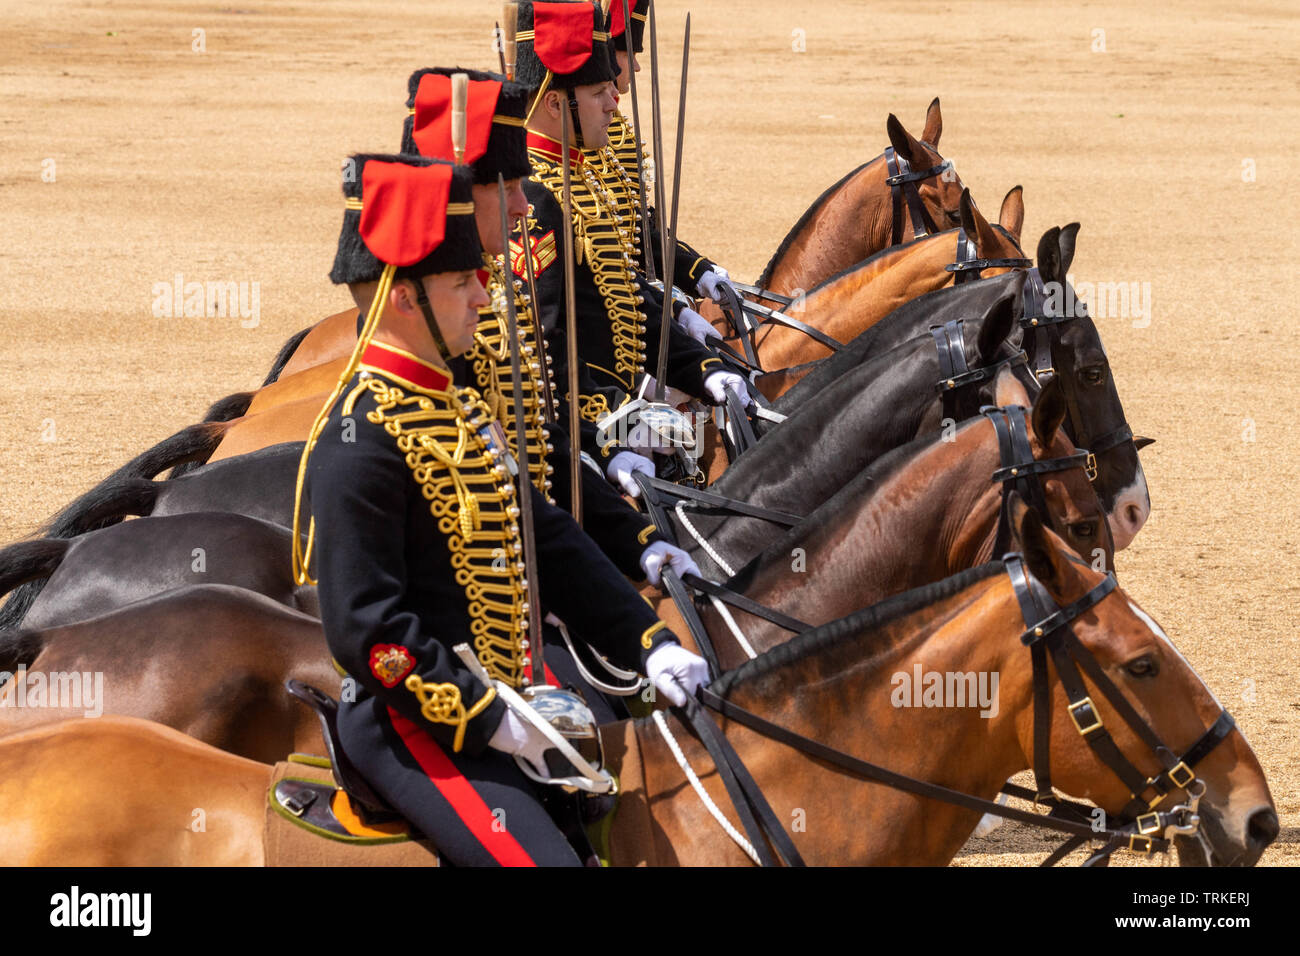 London, UK. 8th June 2019 Trooping the Colour 2019, The Queen's Birthday parade on Horseguards Parade London in the presence of Her Majesty The Queen.  Colour trooped by the 1st Battalion Grenadier Guards Royal Horse Artillery  Credit Ian Davidson/Alamy Live News Stock Photo